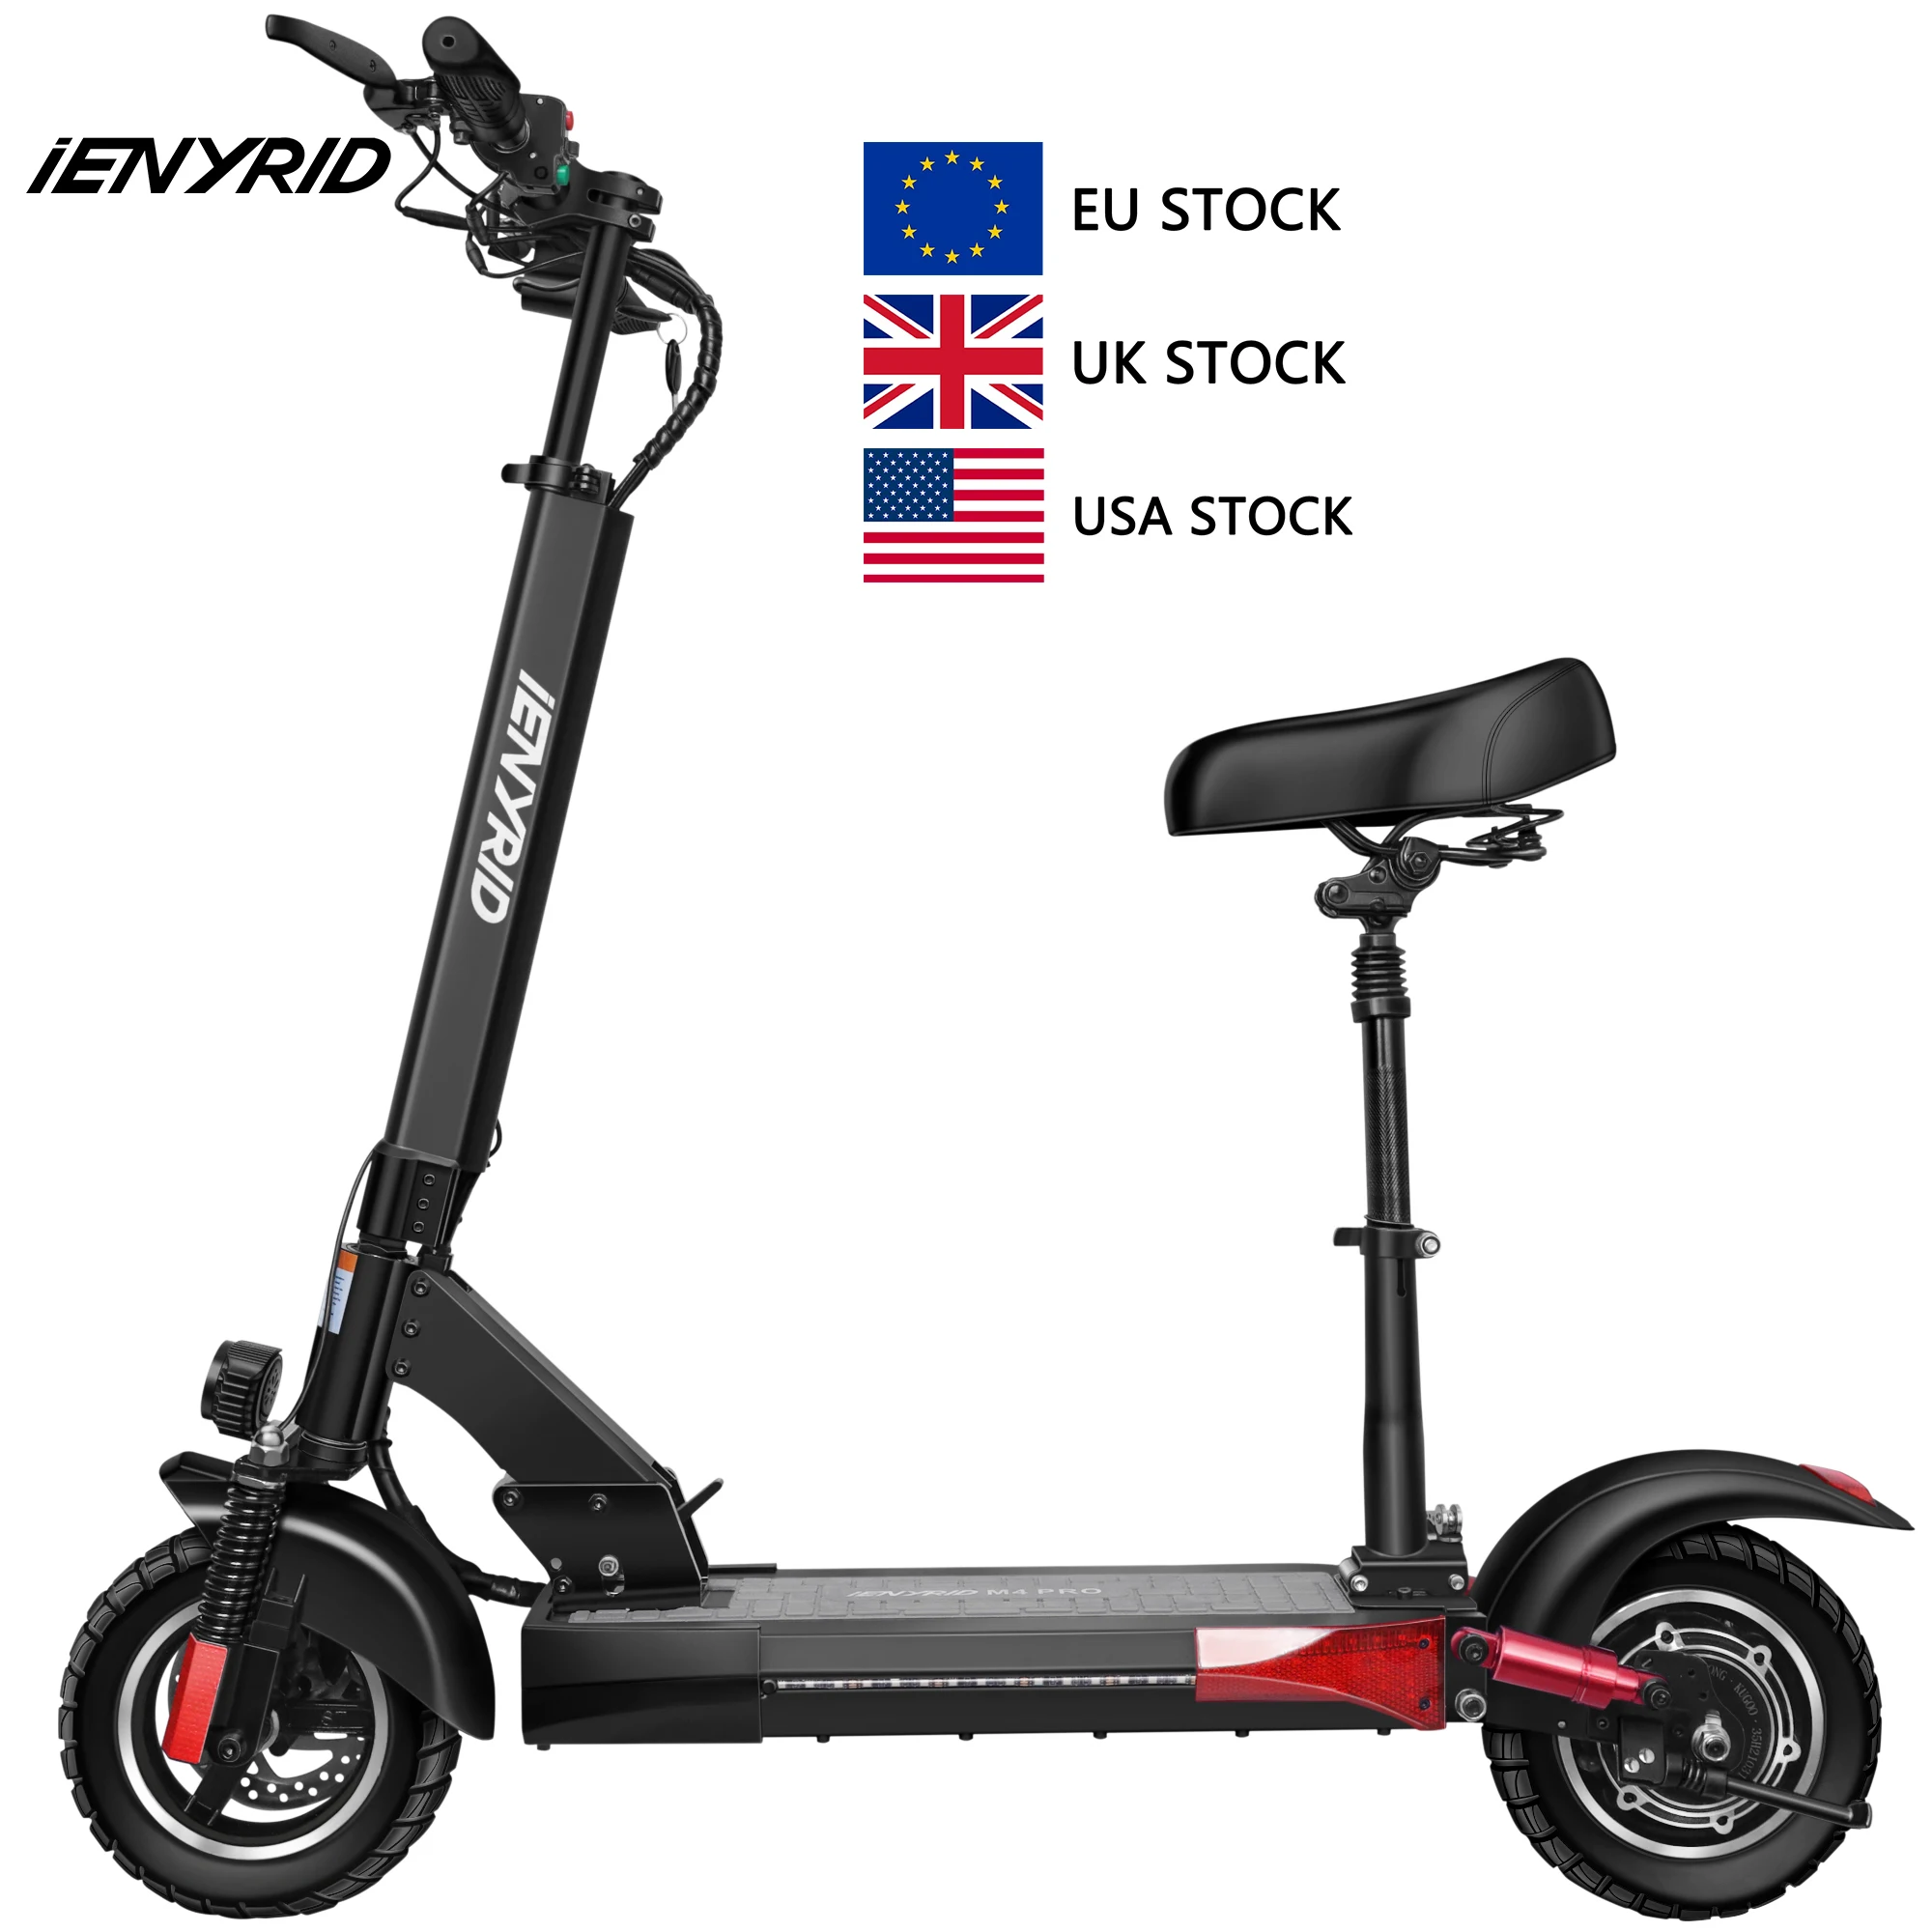 Europe UK US warehouse iENYRID M4 Pro e scooter electric 500W 10Inch motor two wheels folding electric scooter drop ship